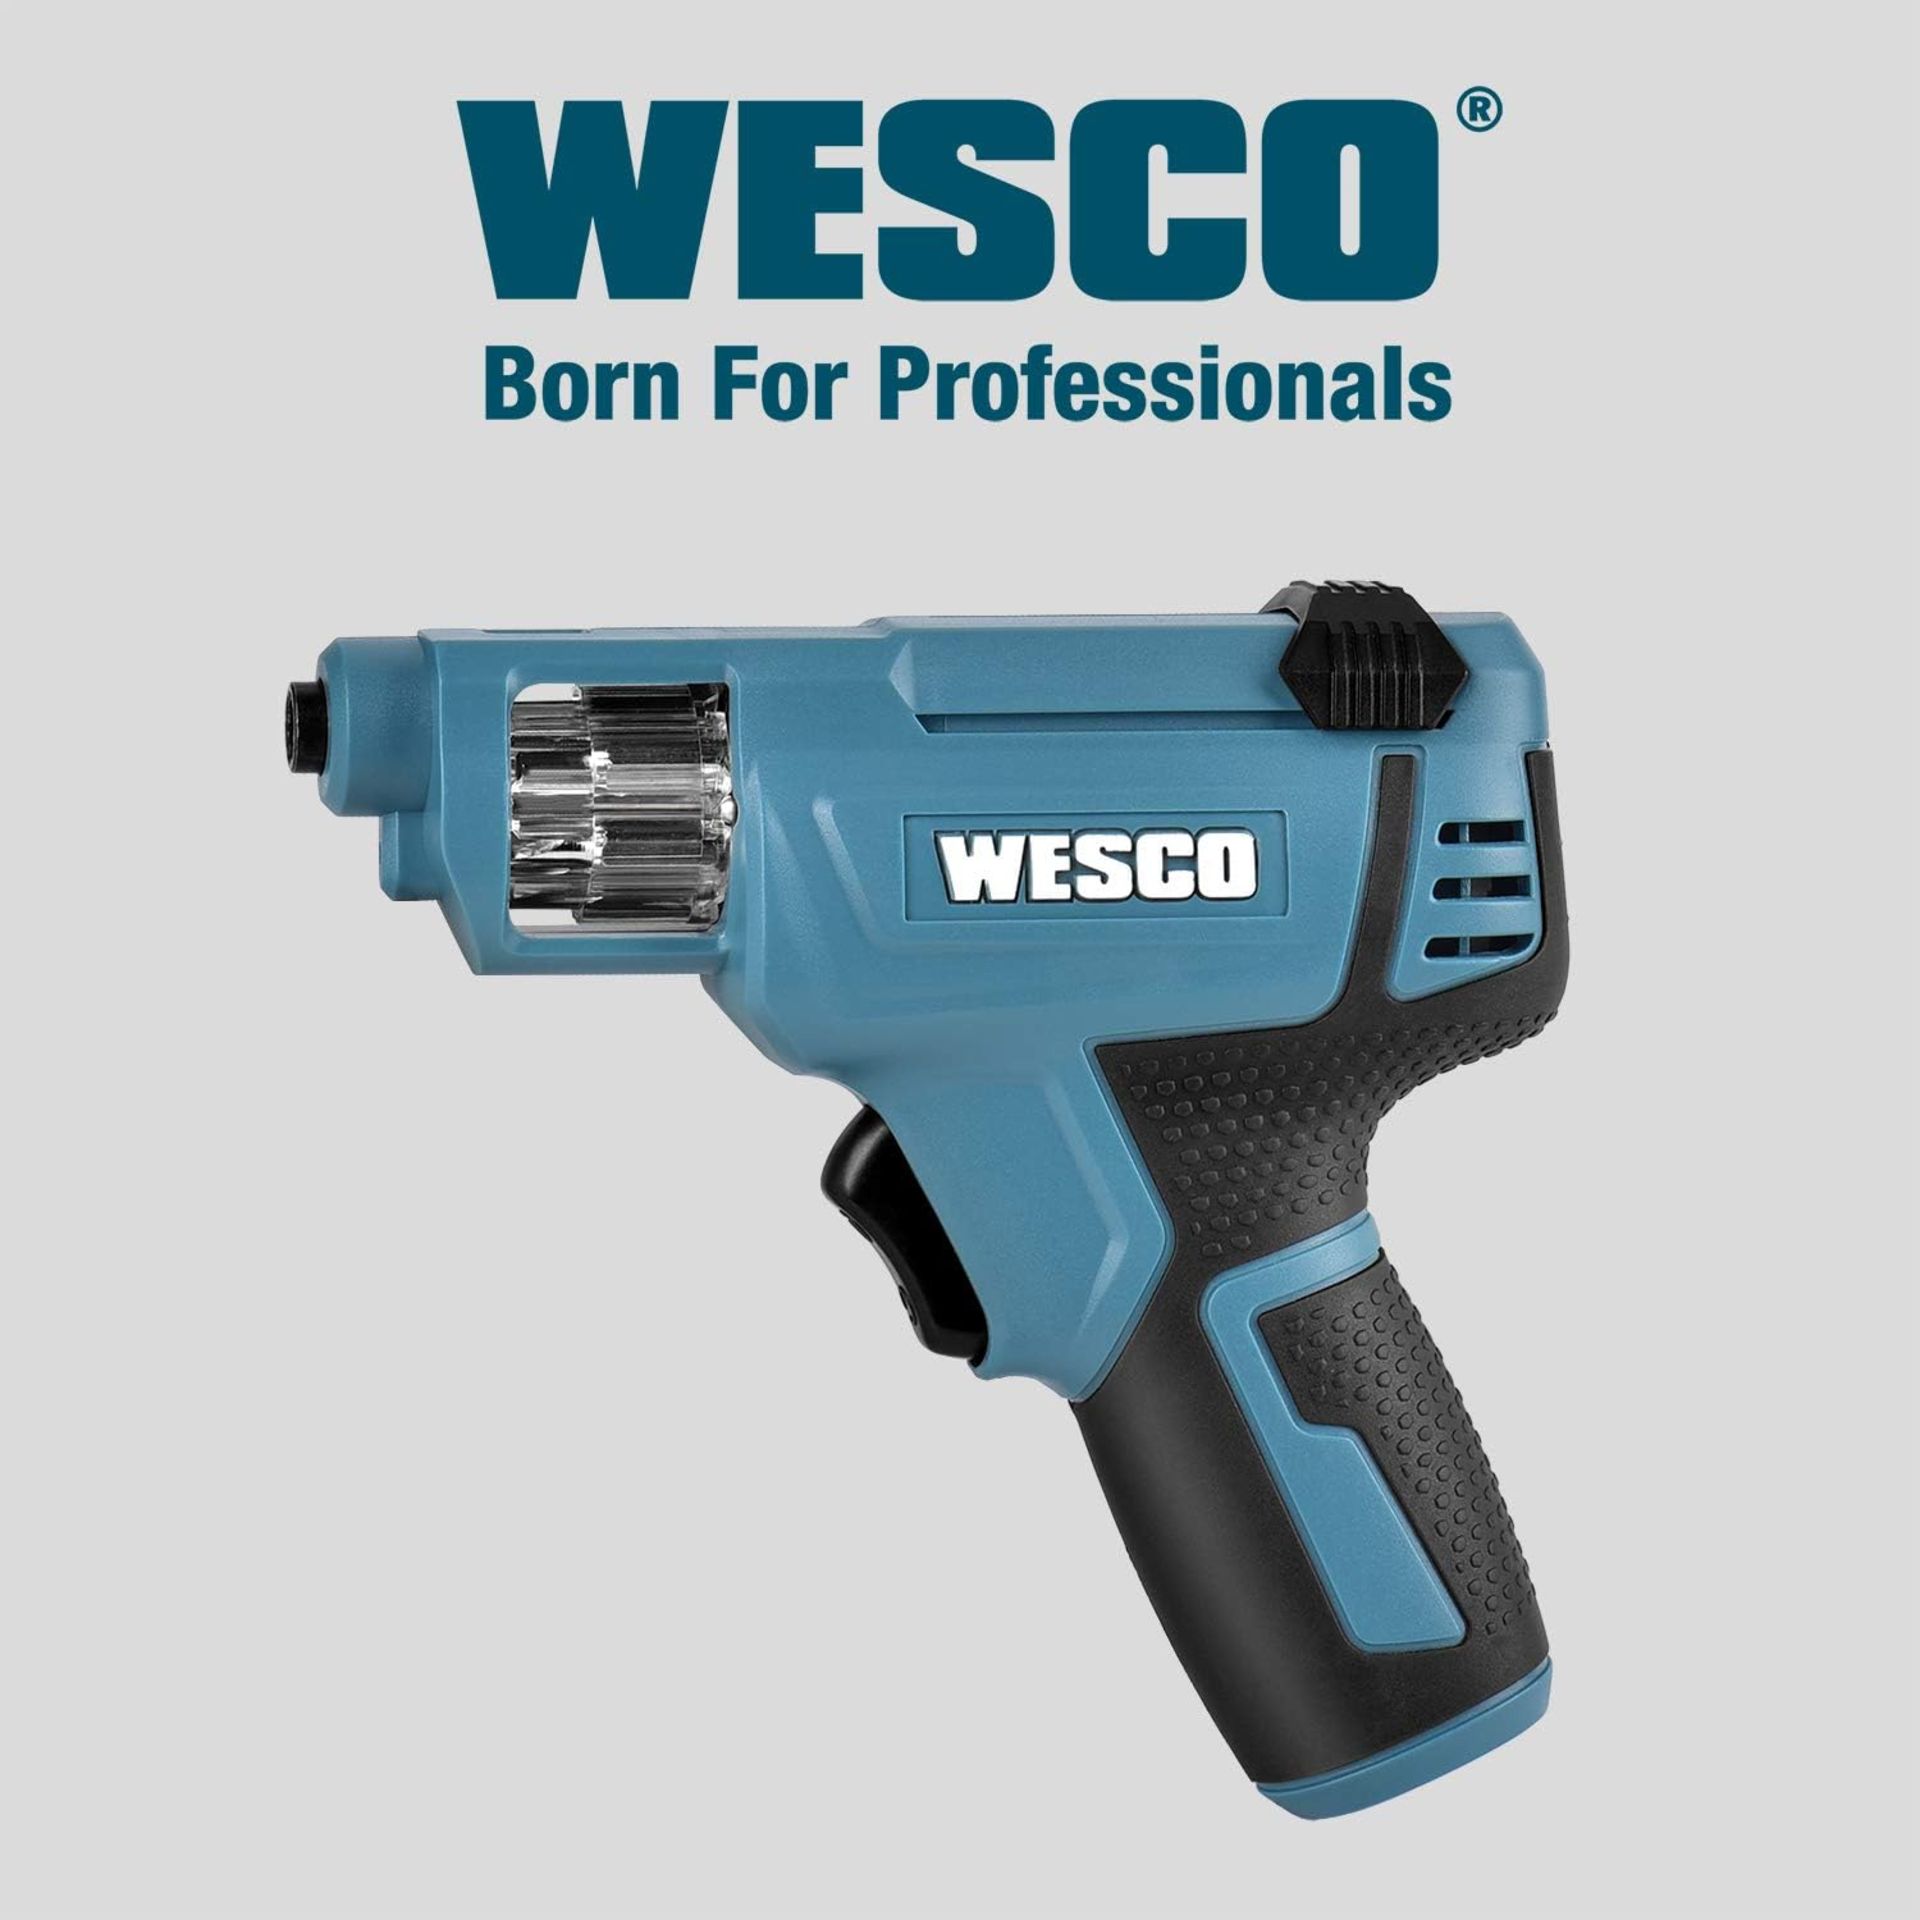 12x NEW & BOXED WESCO 3.6V 1.5Ah Lithium Screwdriver 3.5NM. RRP £30 EACH. Off-Set Head Makes Your - Image 7 of 7